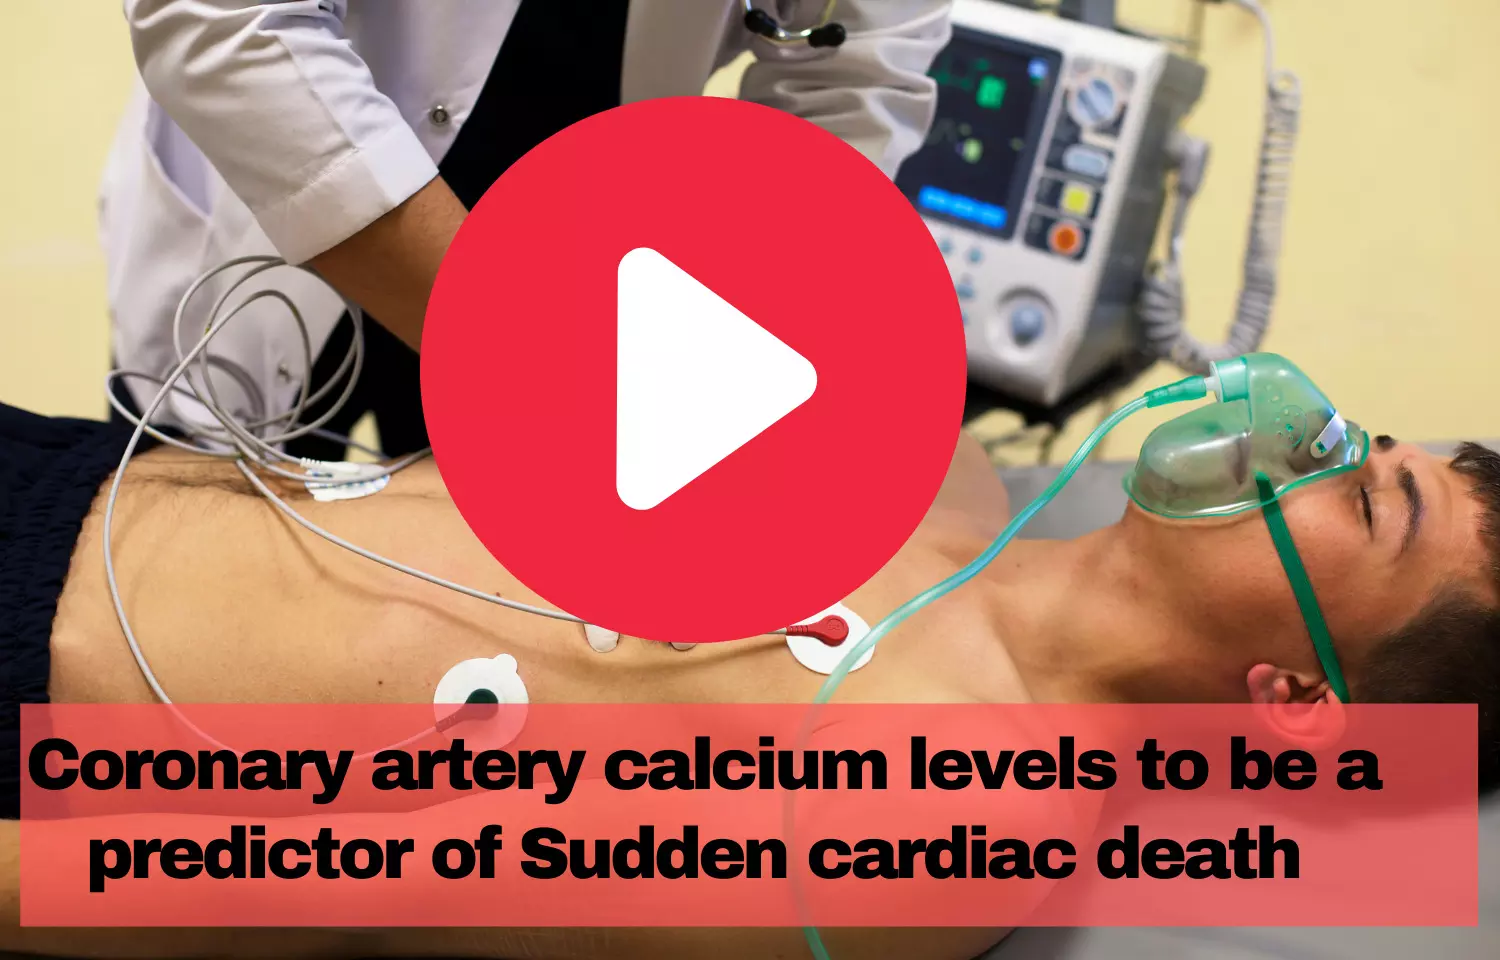 Journal Club- Coronary artery calcium levels to be a predictor of sudden cardiac death